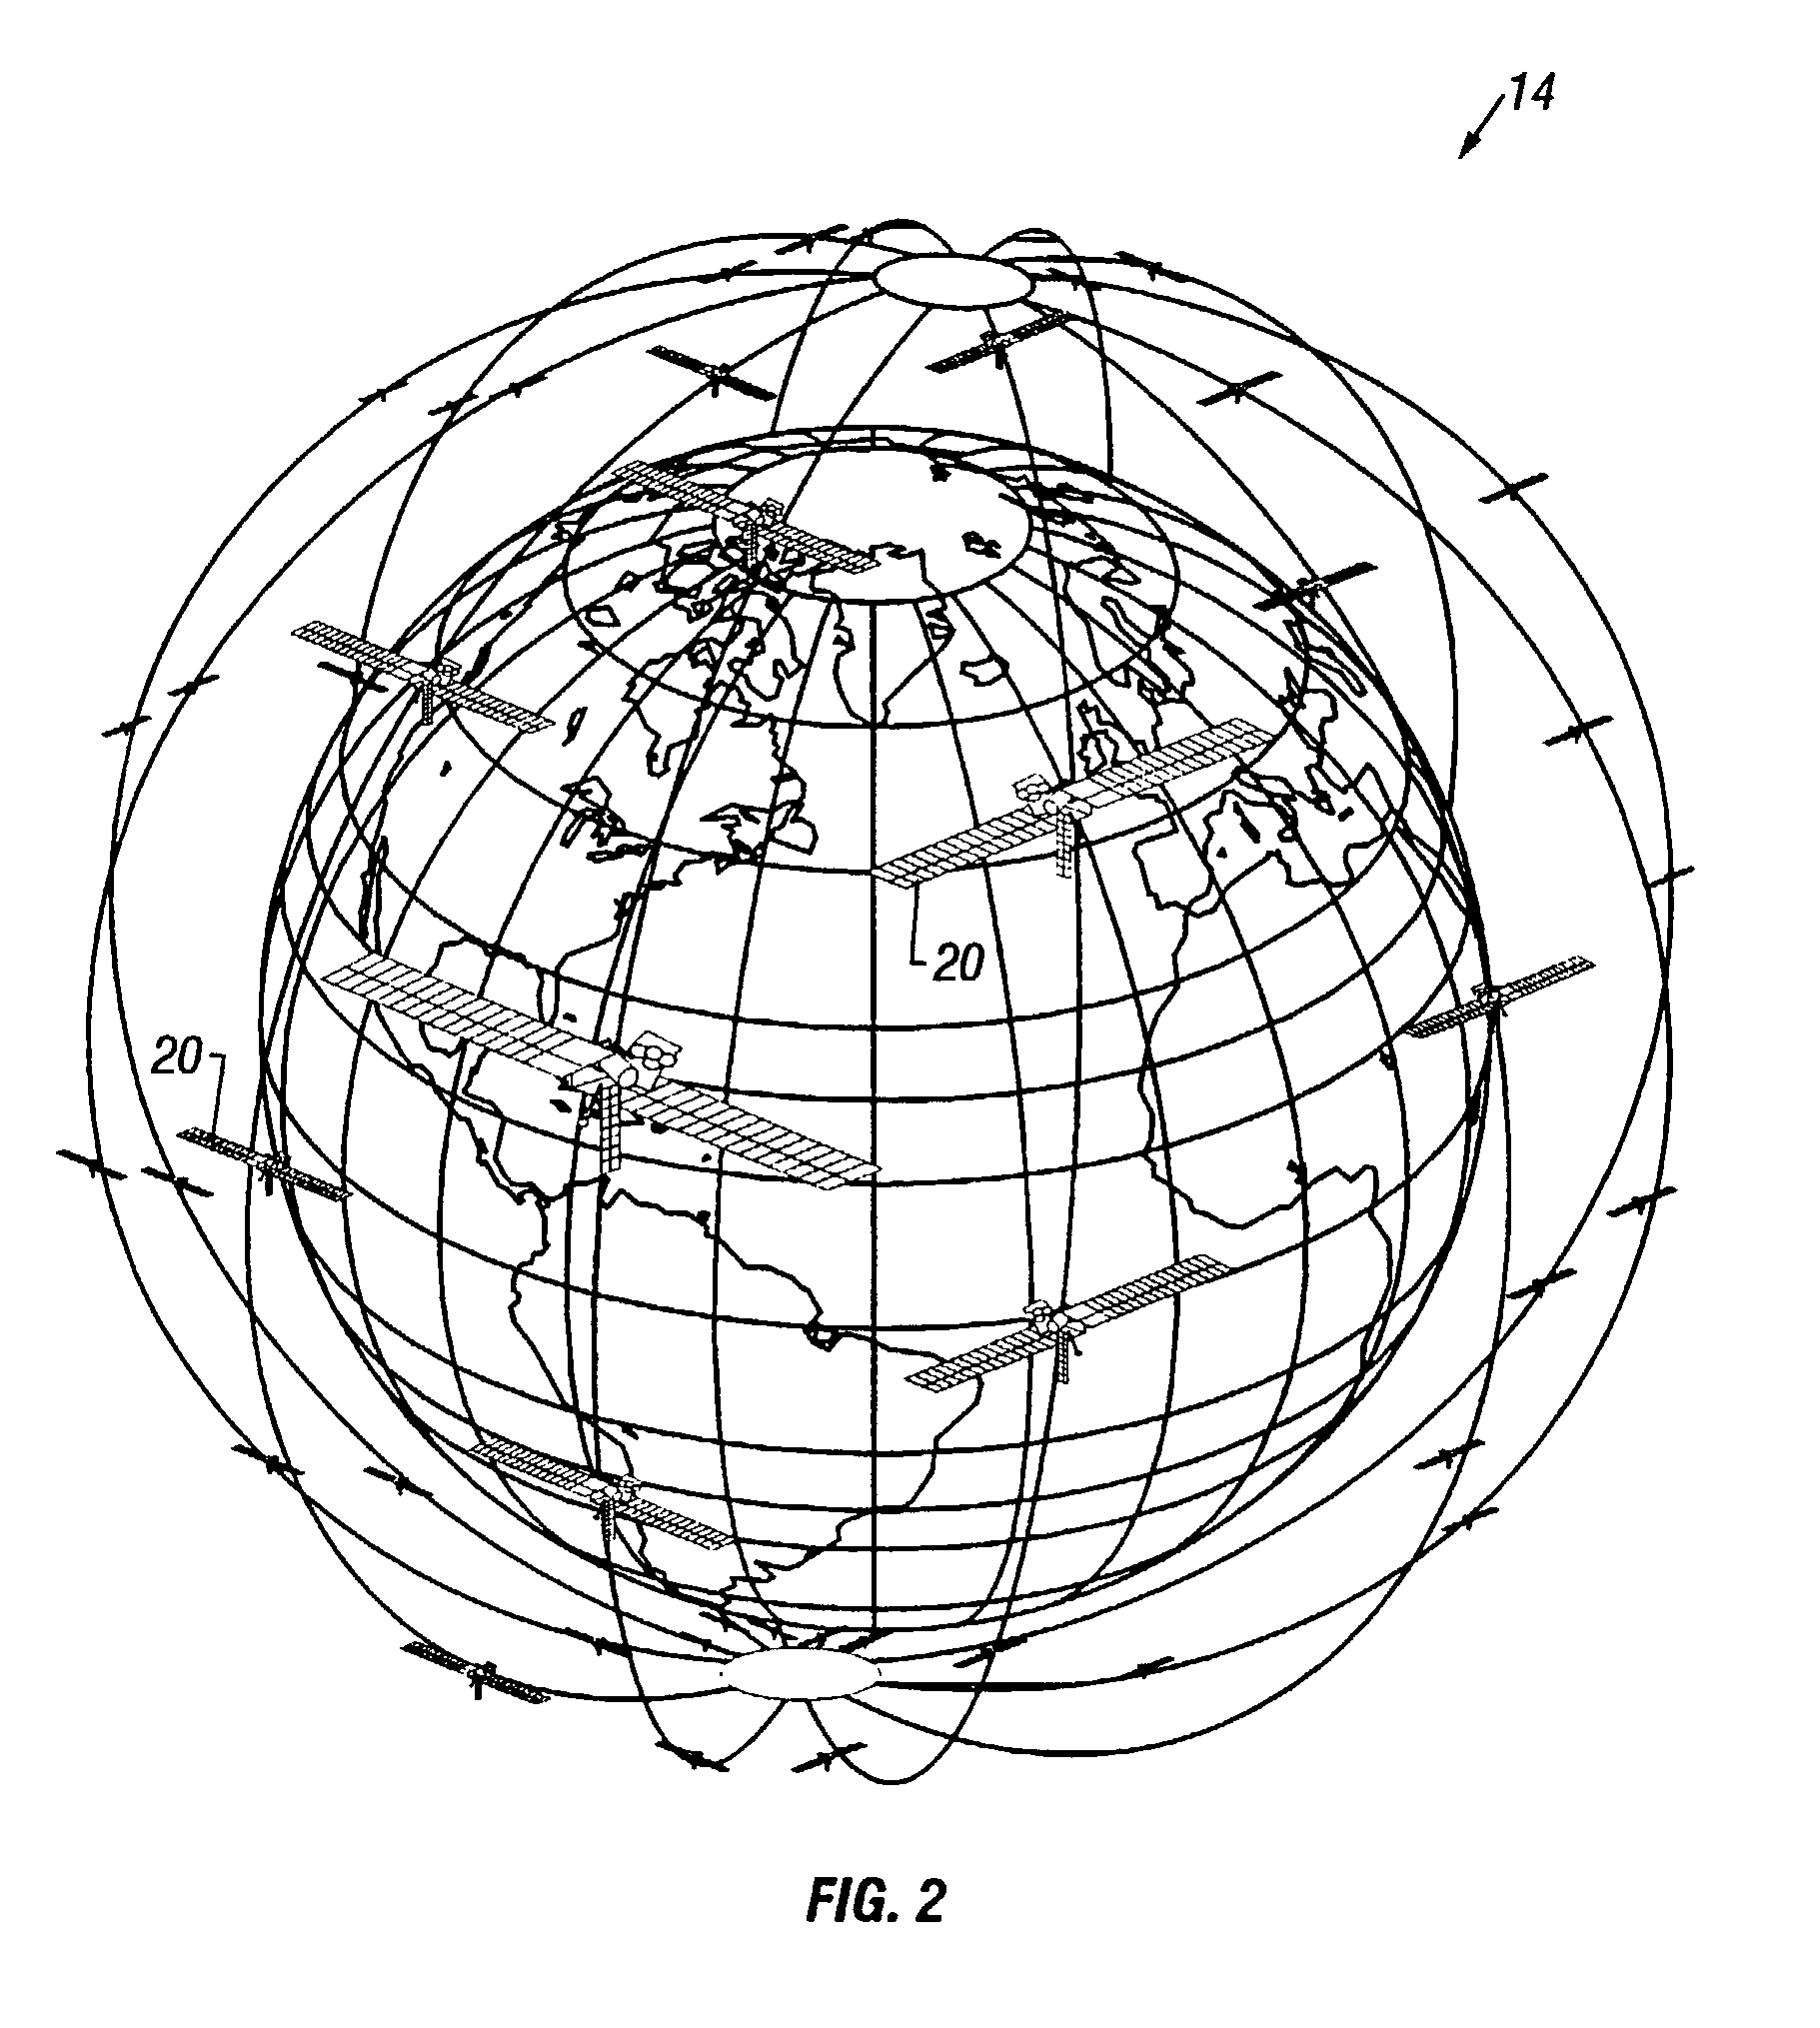 System and method for interfacing satellite communications with aircraft